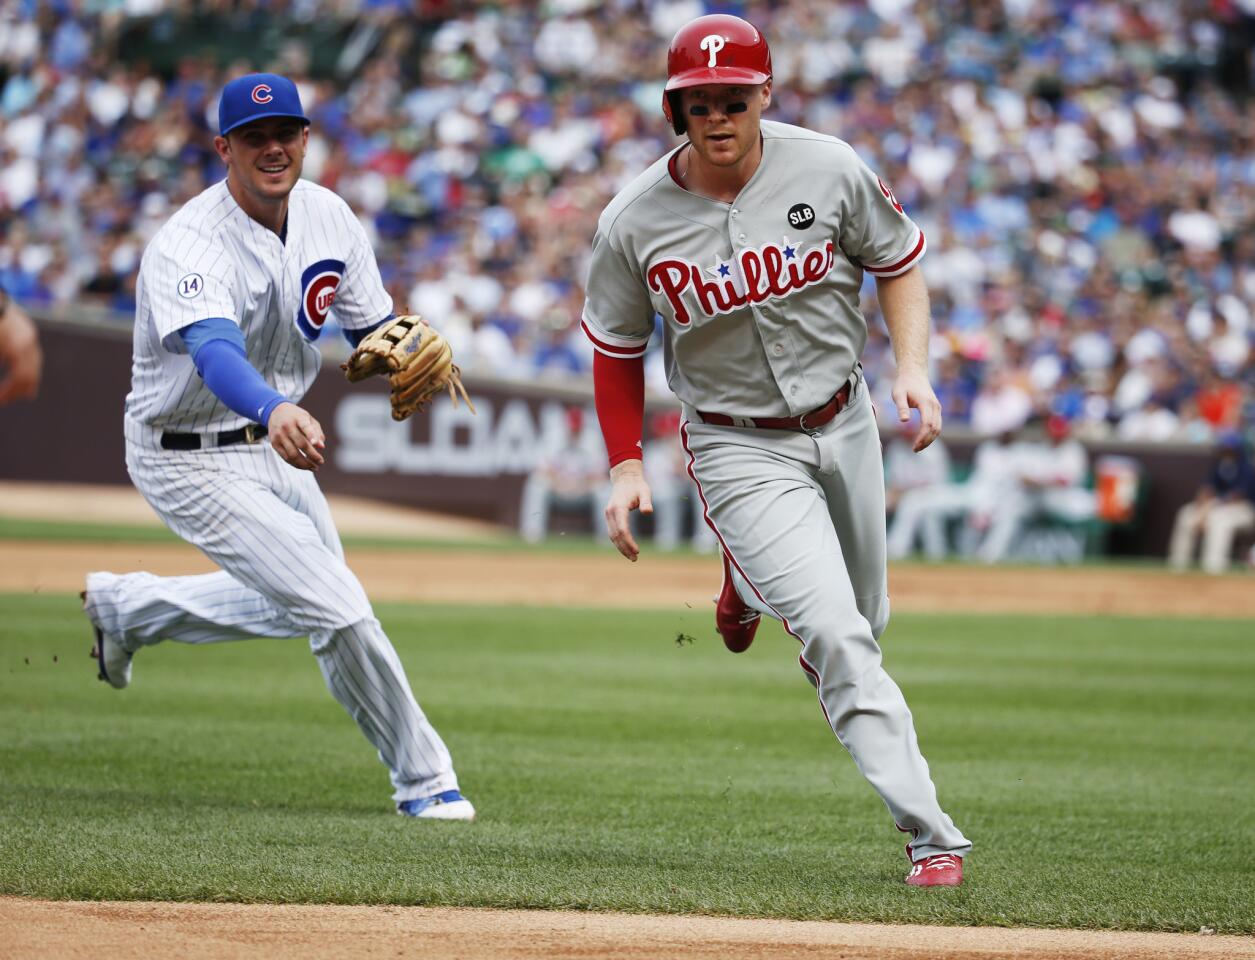 Phillies 5, Cubs 3 (10 innings)